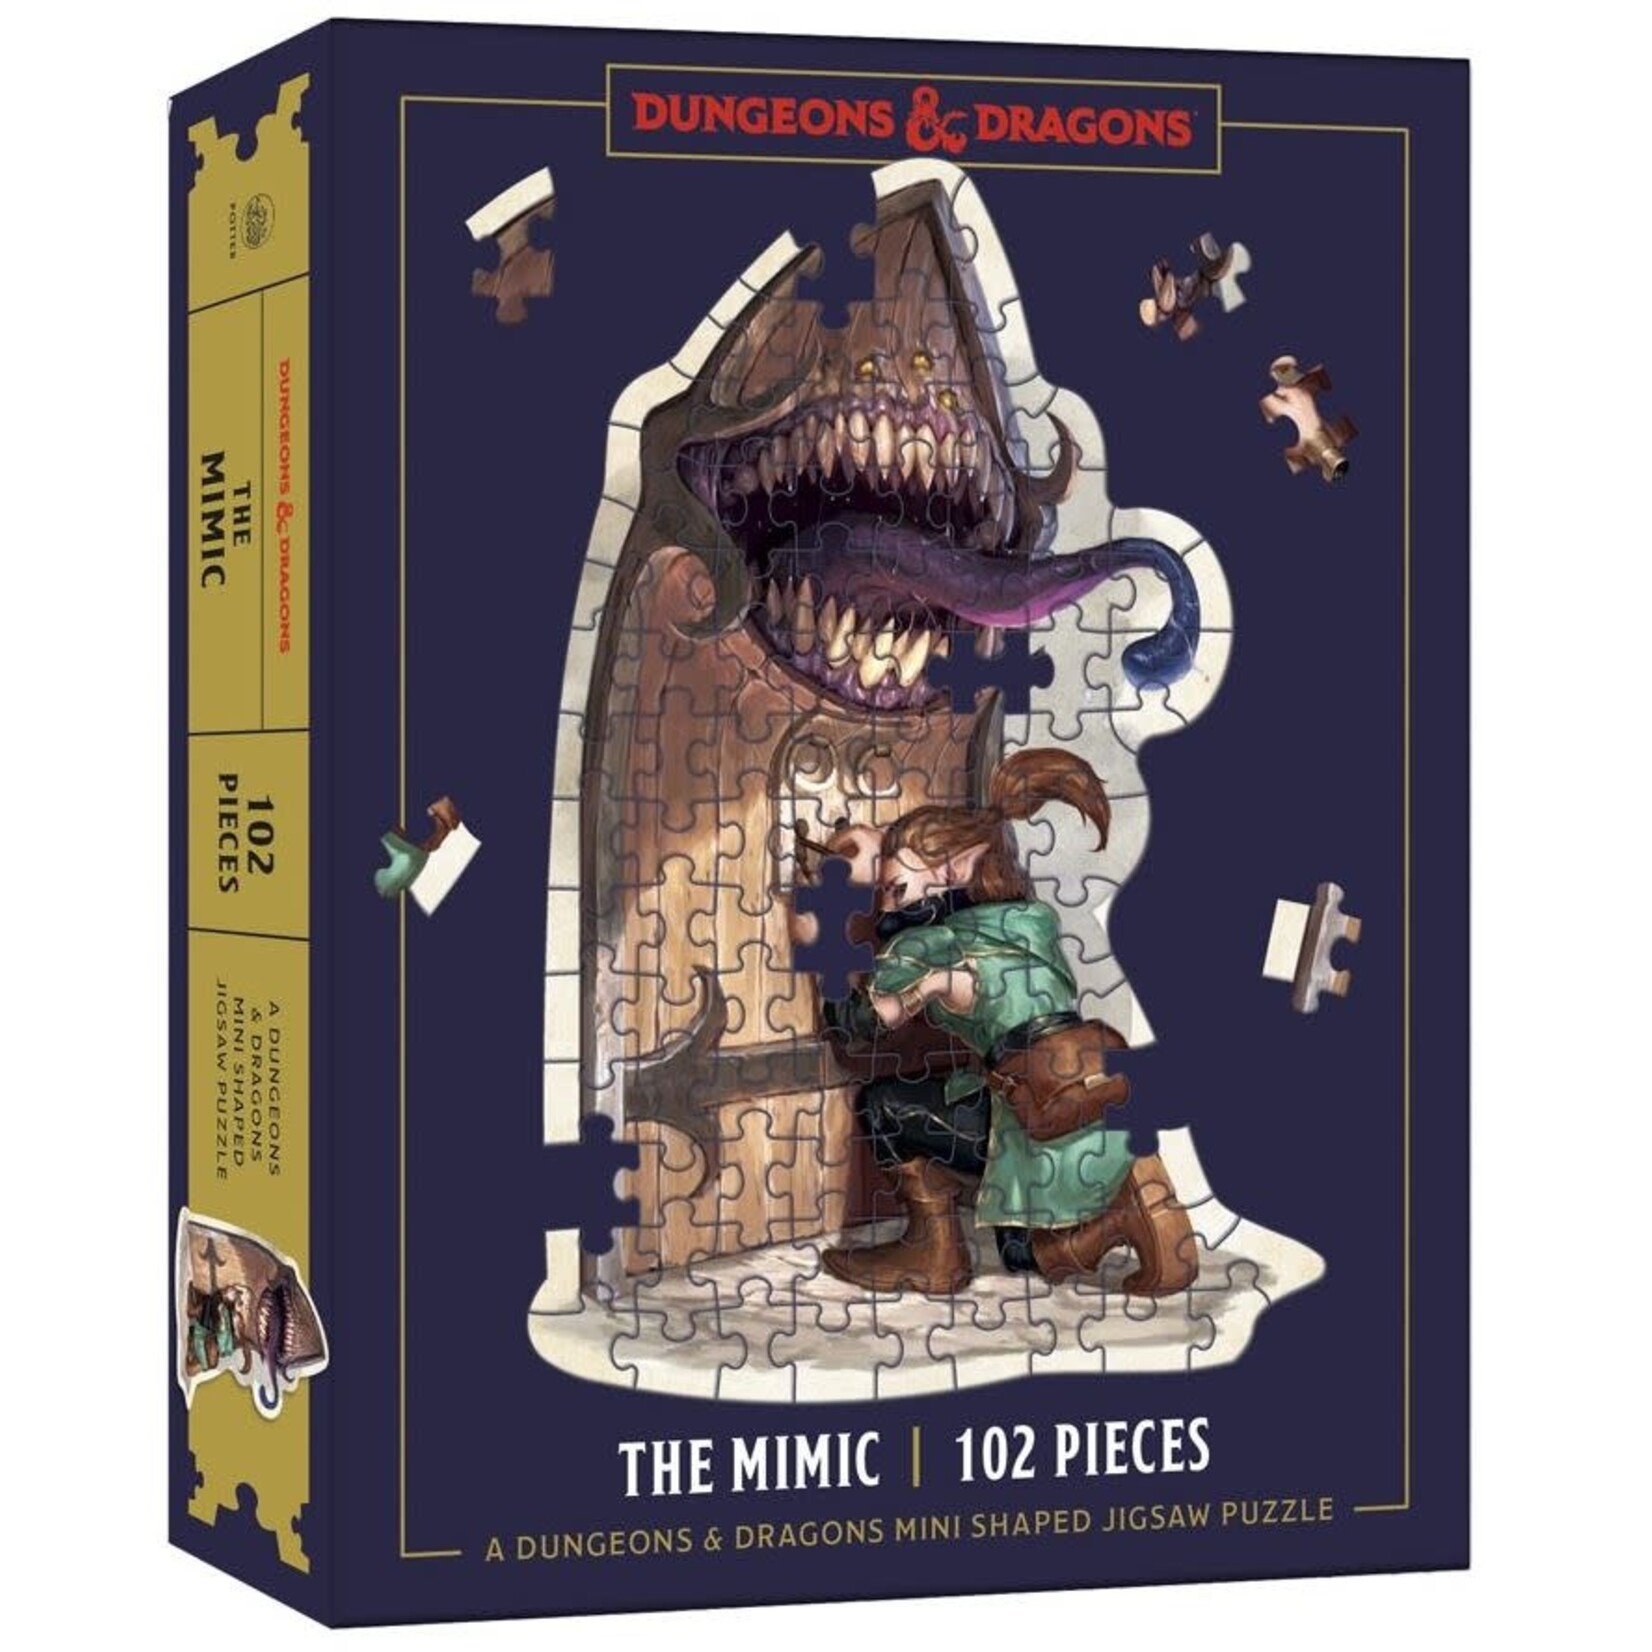 D&D Mini Shaped Jigsaw Puzzles: The Mimic Edition Dungeons & Dragons